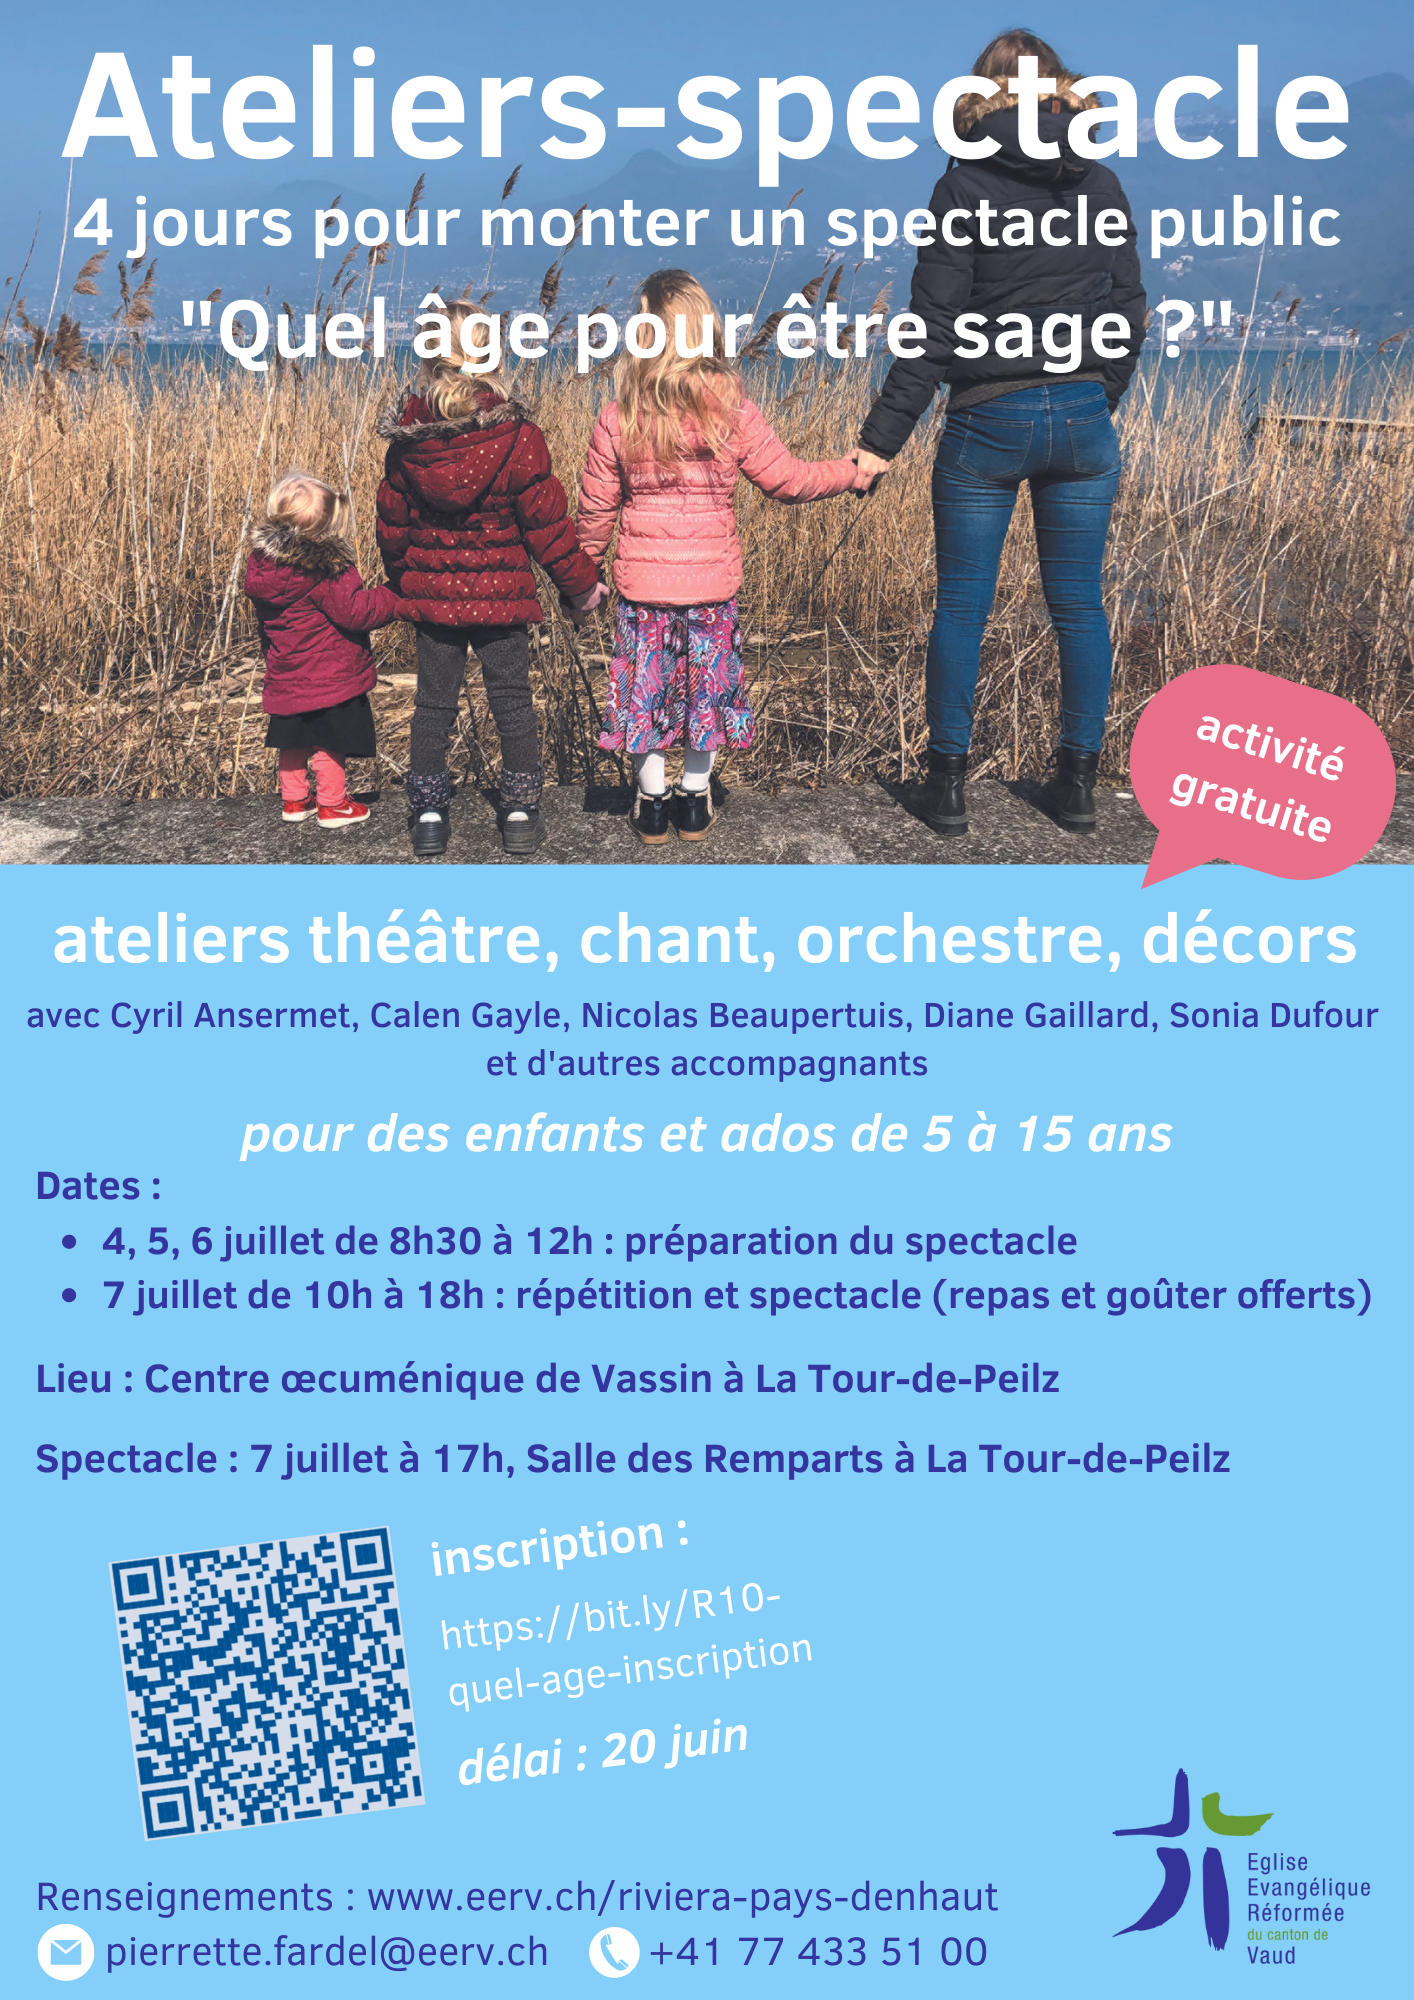 Ateliers-spectacle